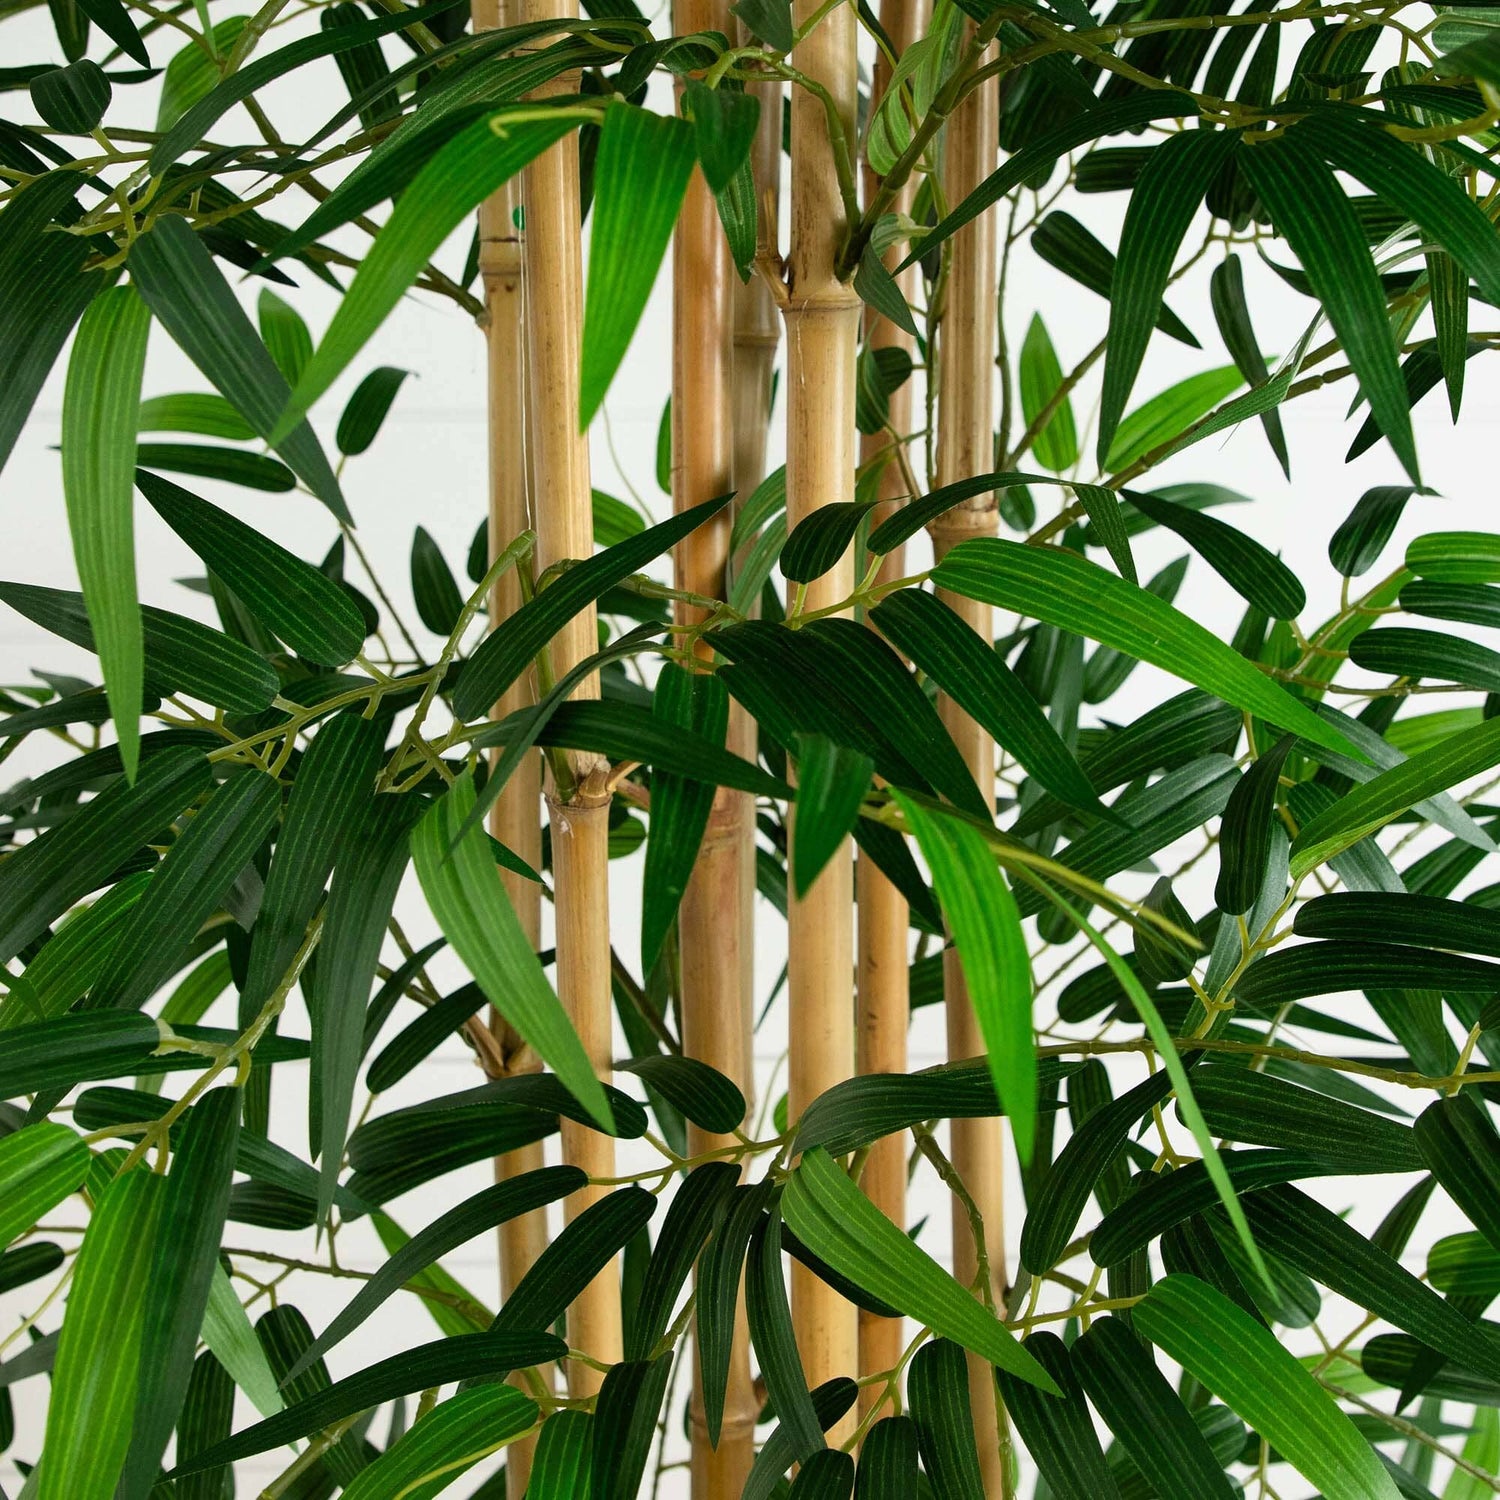 12’ Artificial Bamboo Tree with Real Bamboo Trunks